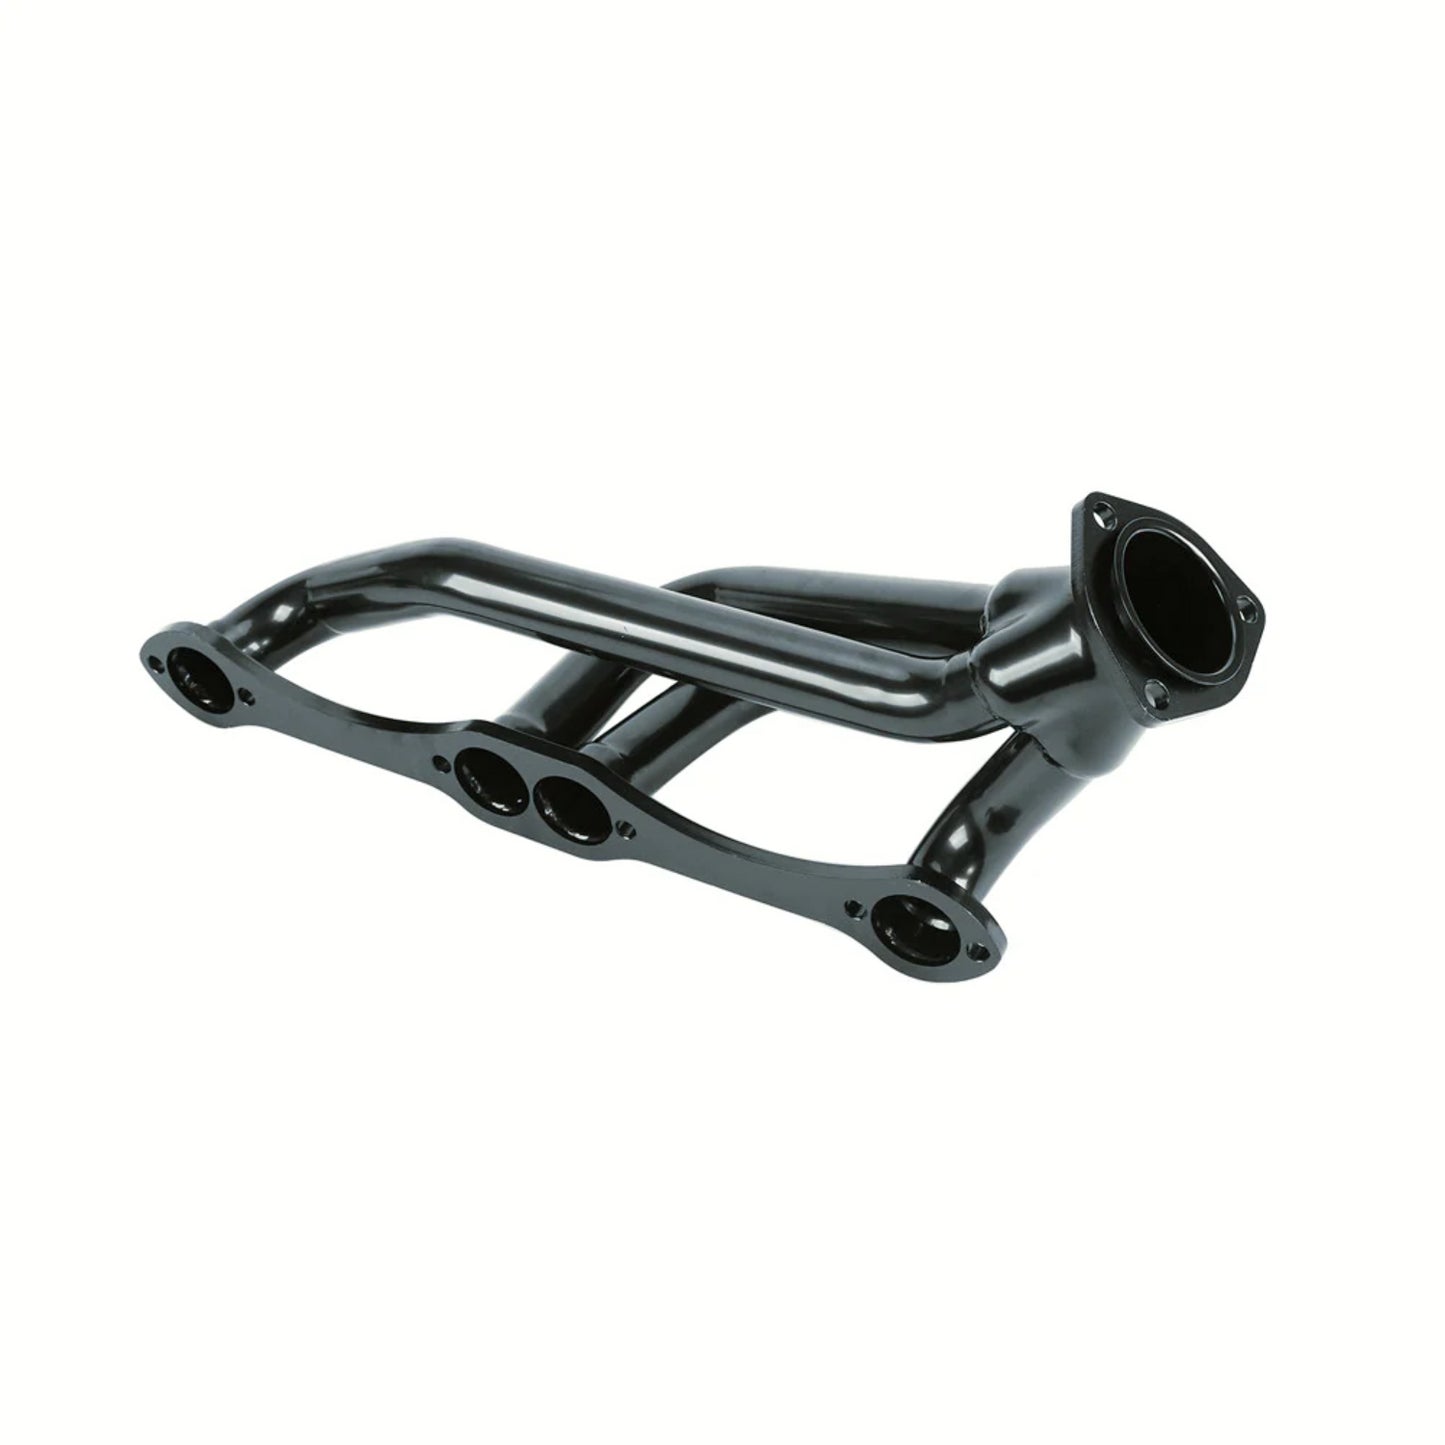 Engine Swap Exhaust Manifold Headers for Small Block Chevy Blazer S10 S15 283 302 350 V8 Black